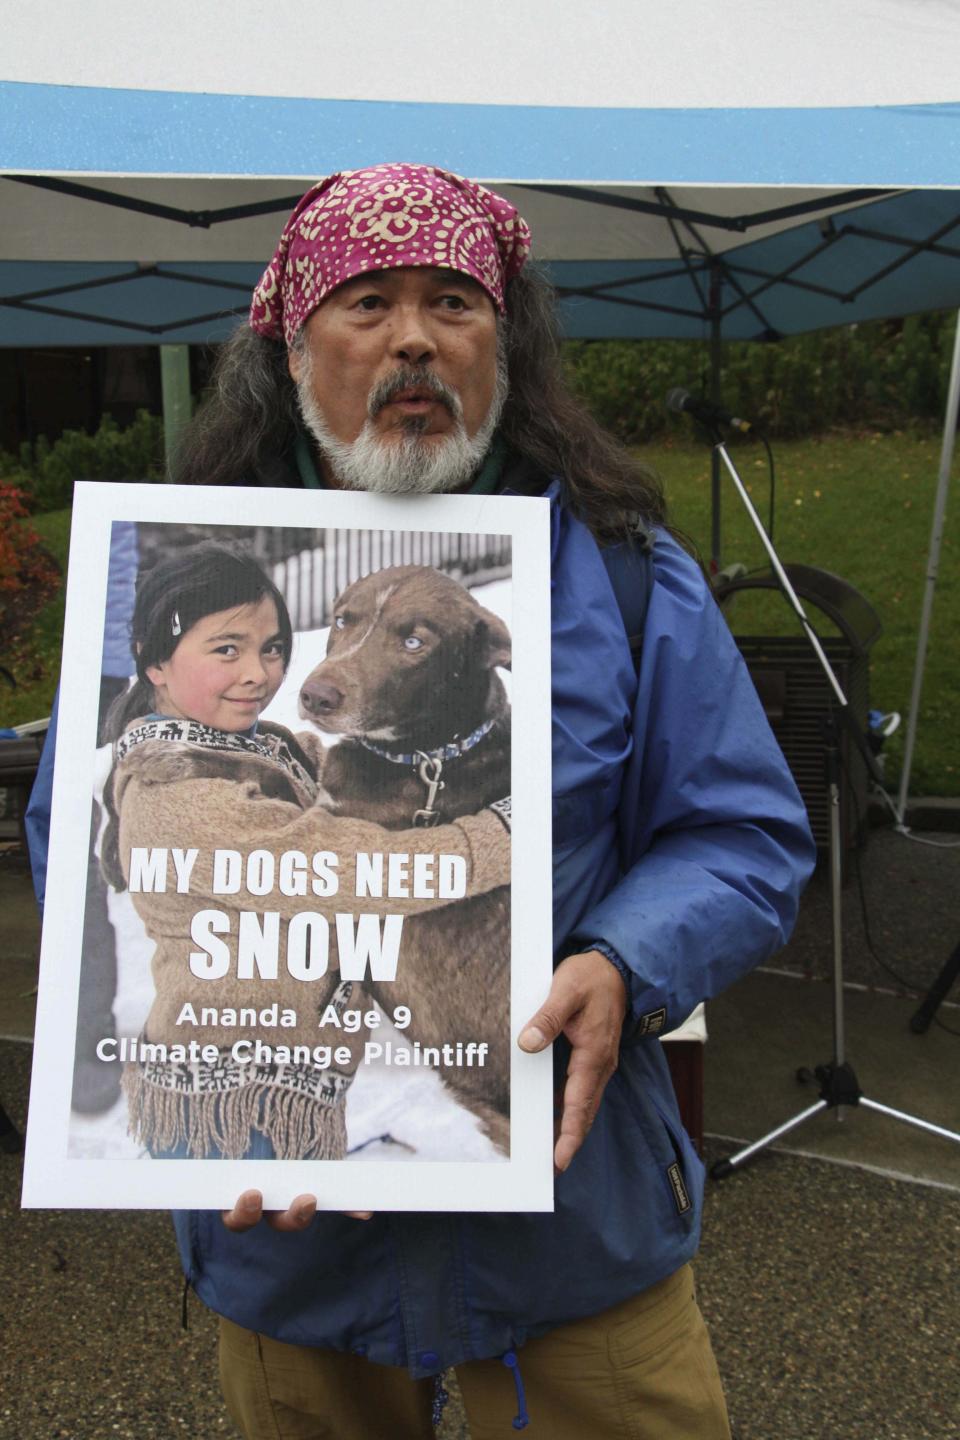 FILE - Dune Lankard of Cordova, Alaska, holds a sign showing his daughter, Ananda Rose, a budding musher, outside Boney Courthouse in Anchorage, Alaska, on Oct. 9, 2019. Ananda Rose is one of 16 Alaska youths who in 2017 sued the state, claiming that human-caused greenhouse gas emission leading to climate change is creating long-term, dangerous health effects. The Alaska Supreme Court on Friday, Jan. 28, 2022, upheld the dismissal of a lawsuit filed by the youths, who claimed long-term effects of climate change will devastate Alaska and interfere with their individual constitutional rights. (AP Photo/Mark Thiessen, File)